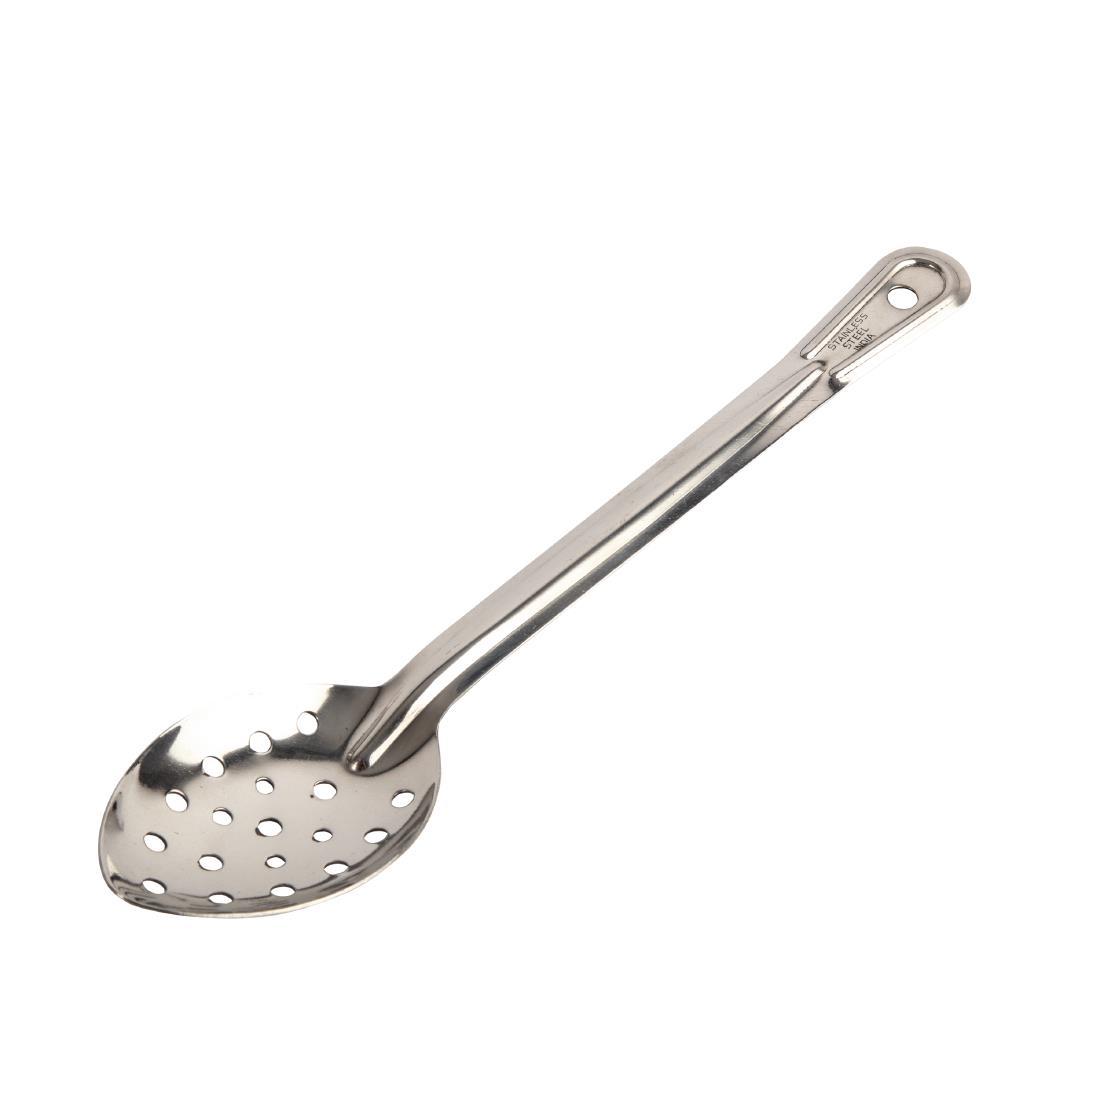 Vogue Stainless Steel Perforated Serving Spoon - J640  - 1